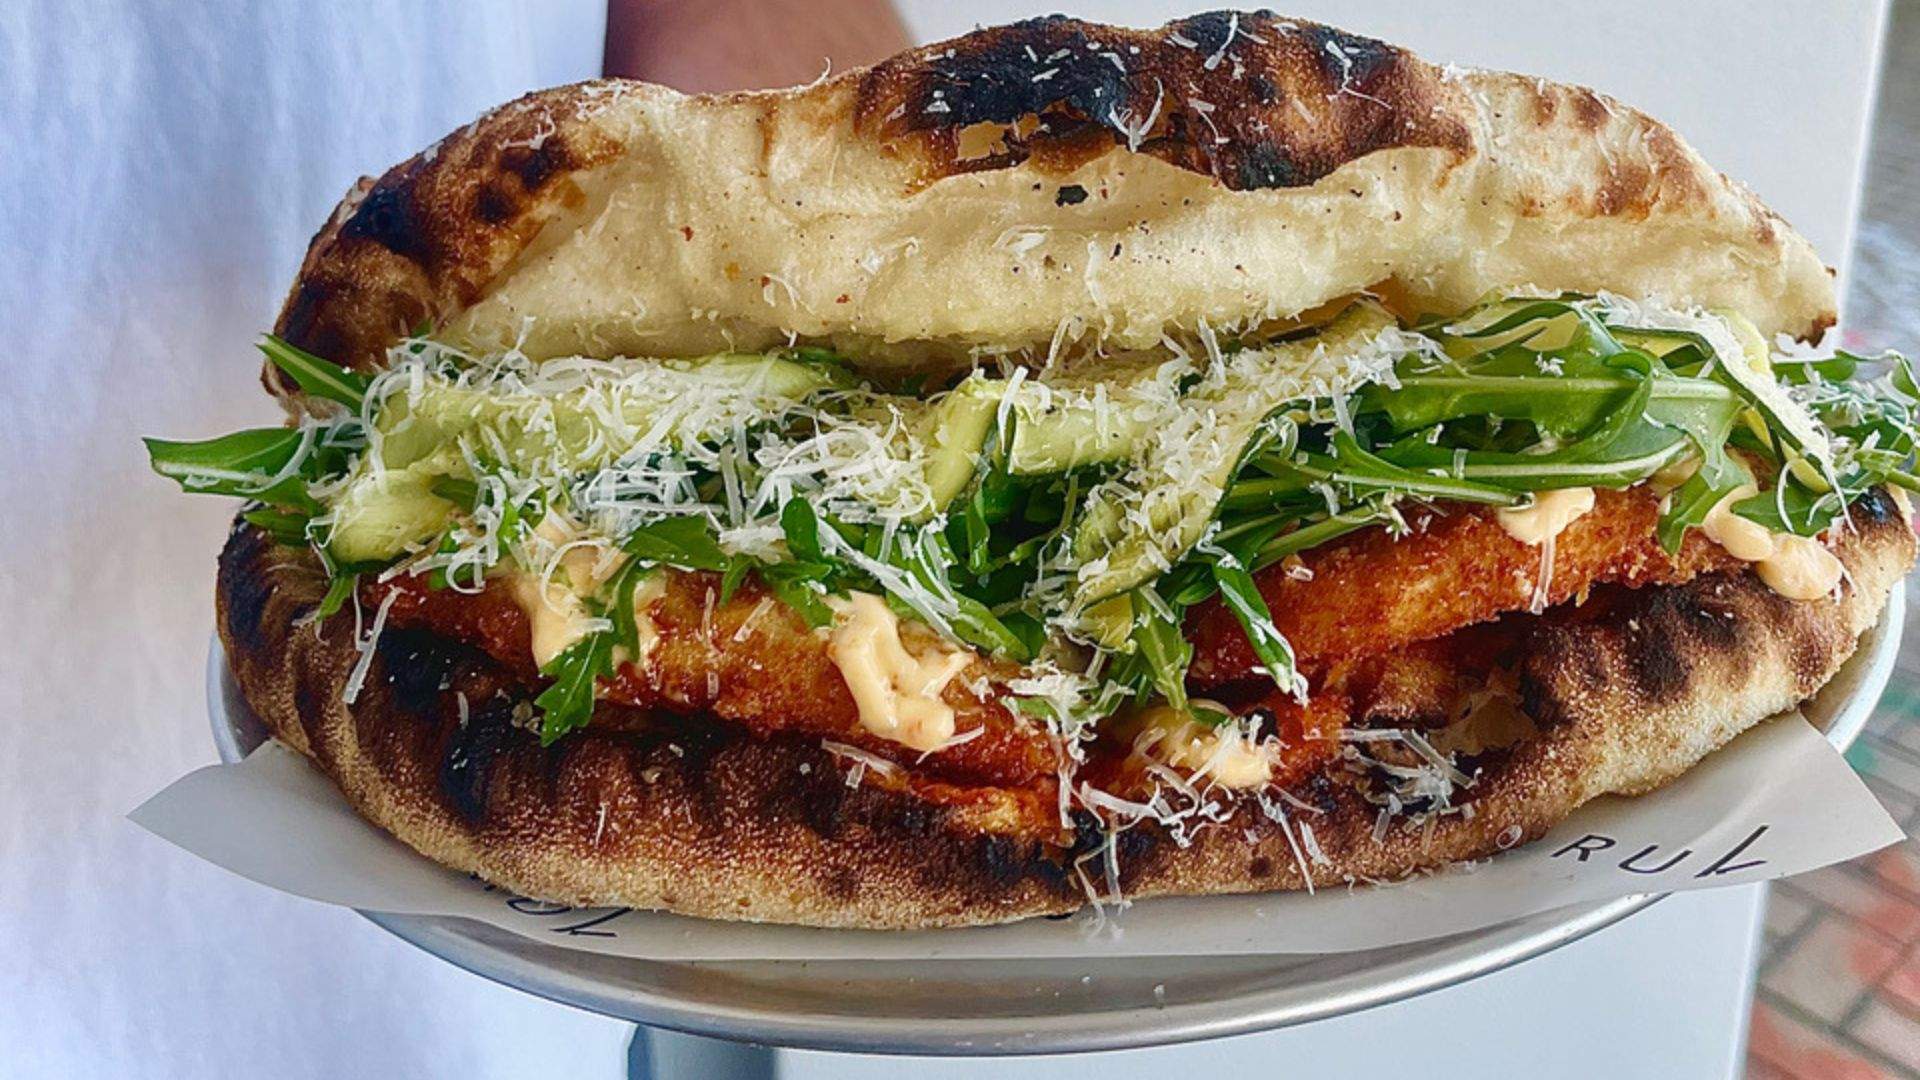 Now Open: Tommy Panini Is Brookvale's New Italian Sandwich Bar From Mariah Carey's Former Private Chef